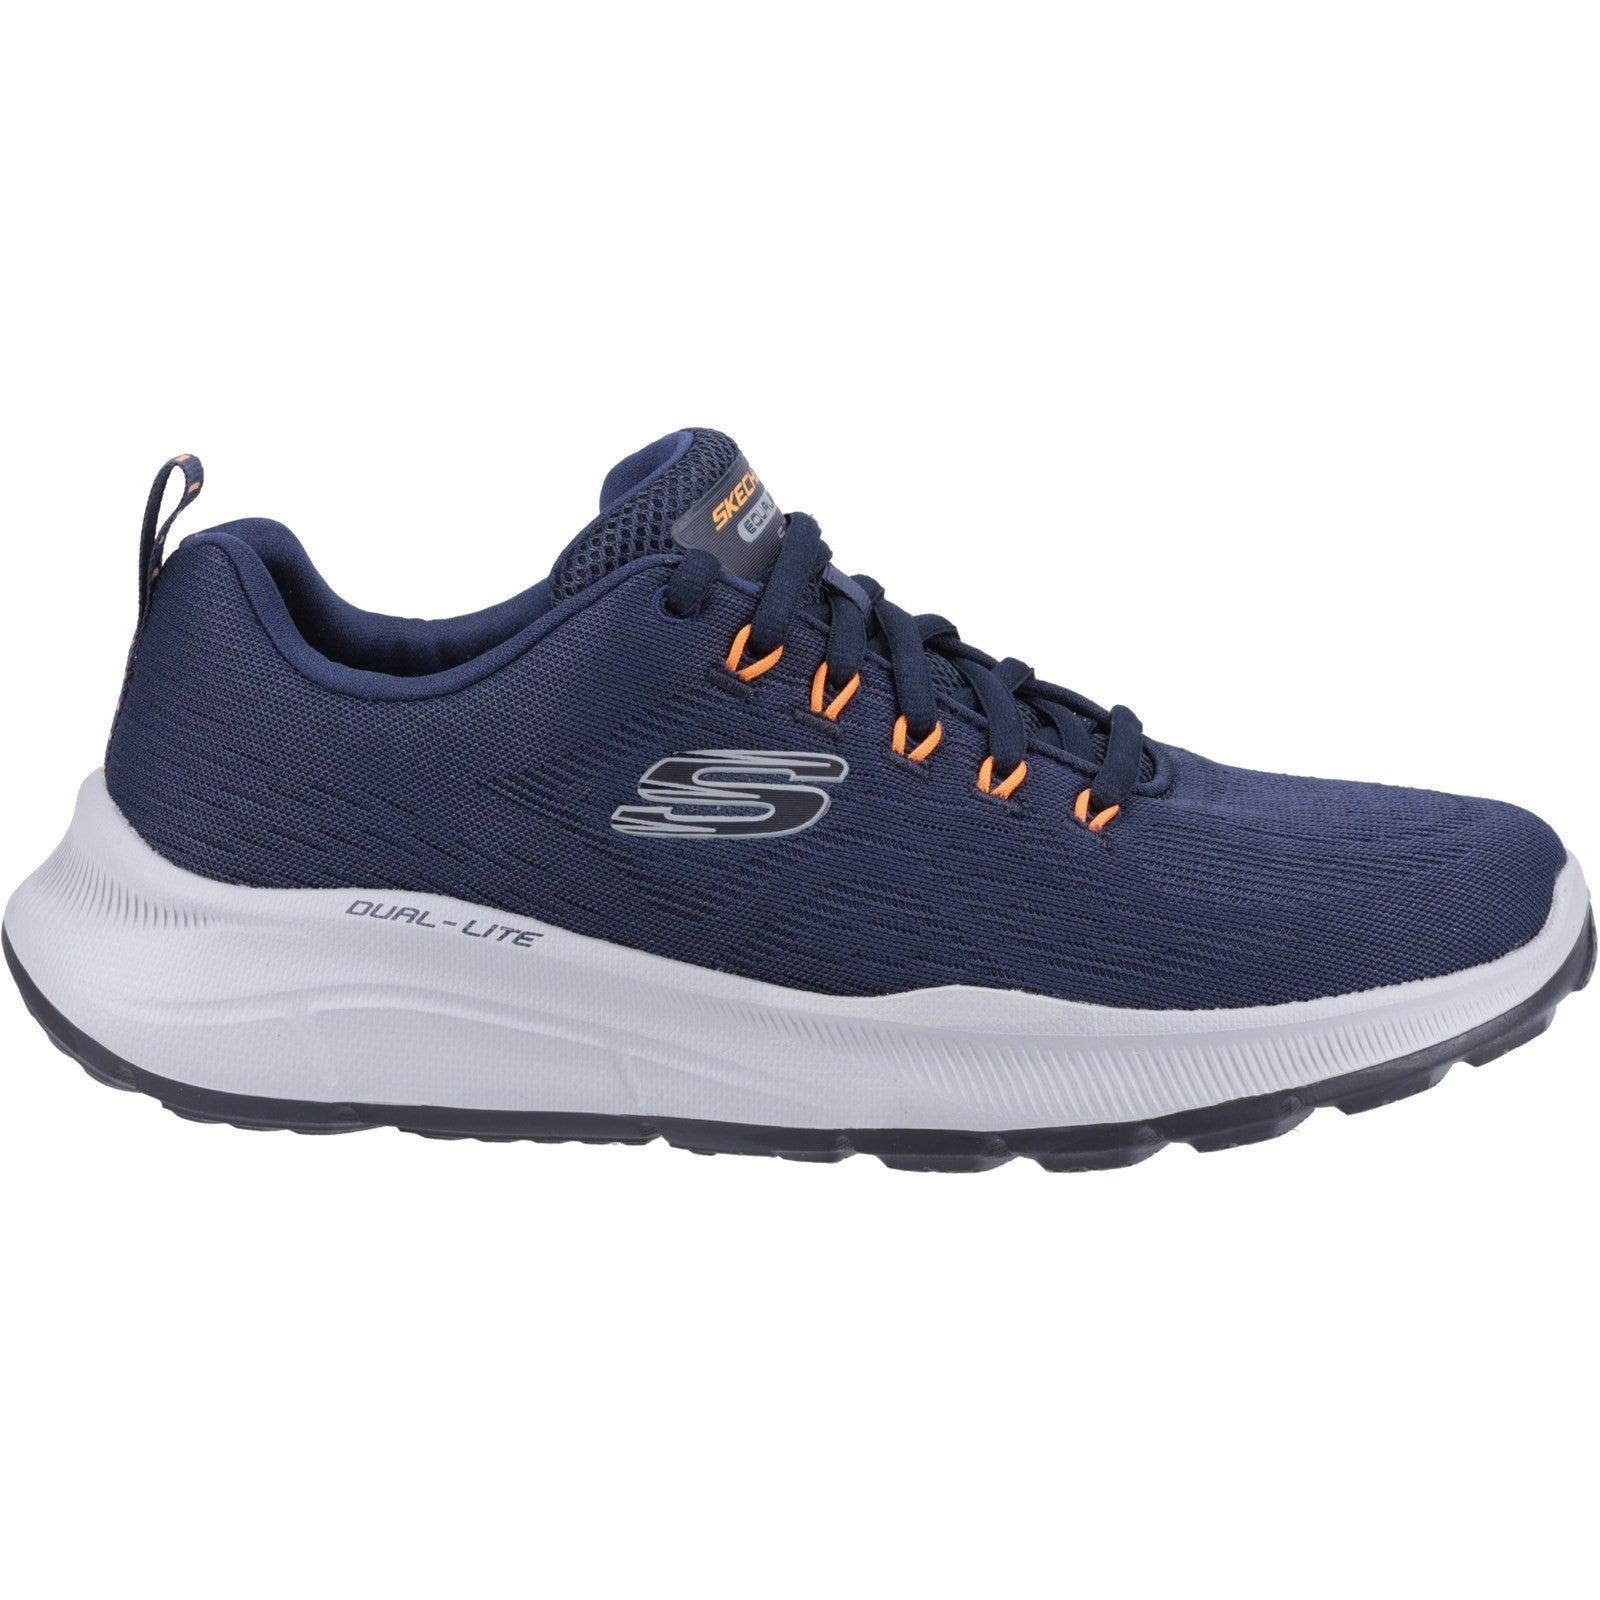 Skechers Mens Equalizer 5.0 Trainers - Navy